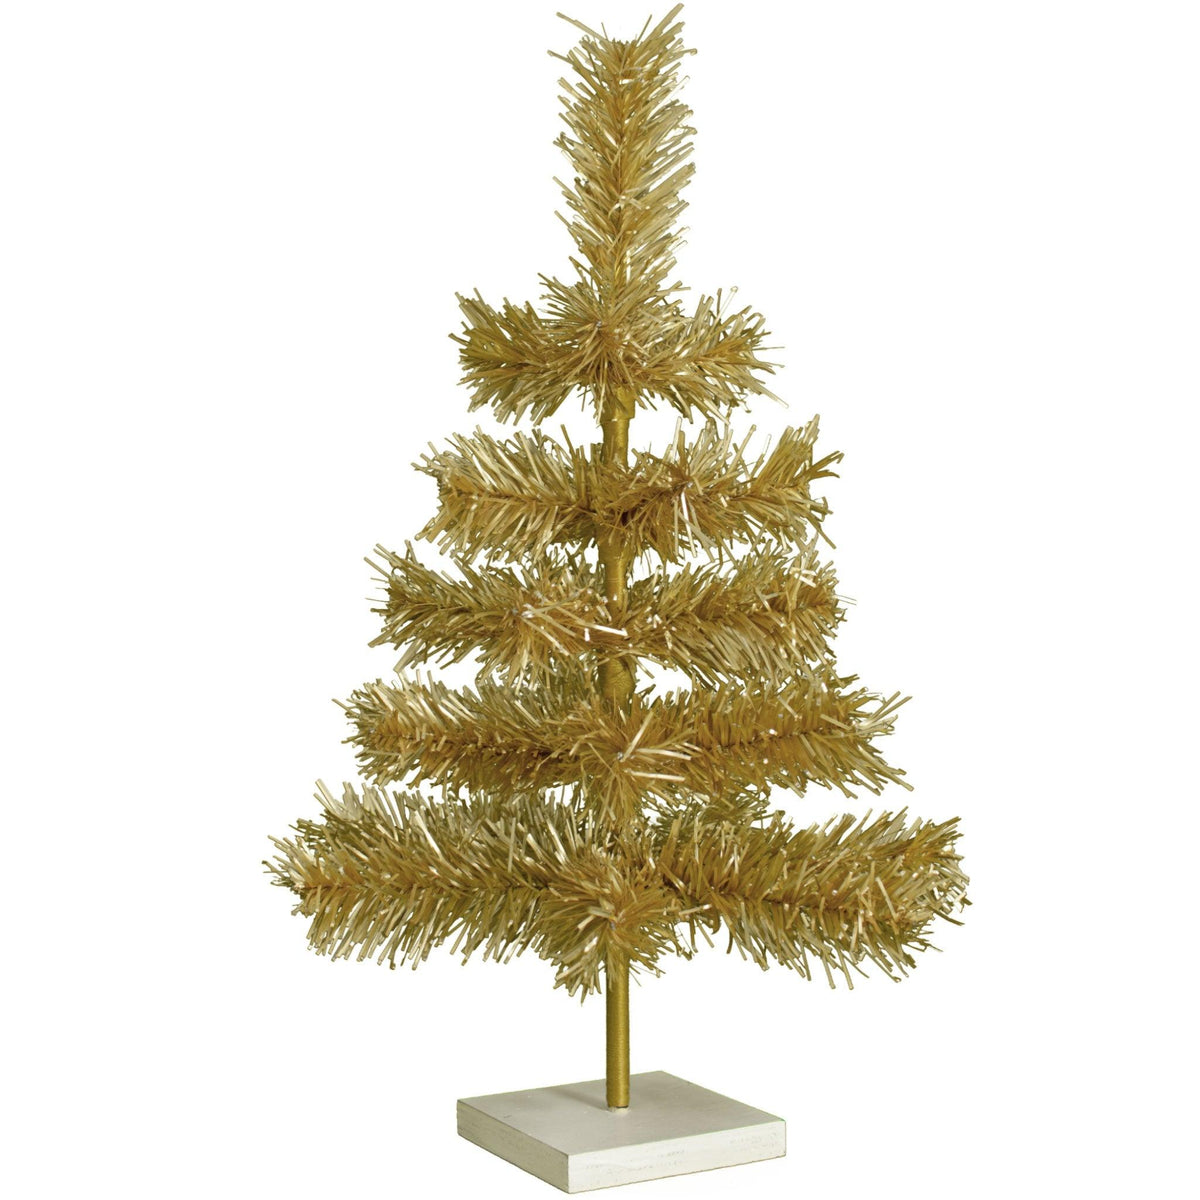 Our 18in Tall Antique Gold Christmas Tree.  Celebrate Lee Display's 120th Anniversary with our brand new Antique Gold colored tinsel Christmas Trees.  Shop for antique gold christmas trees at leedisplay.com